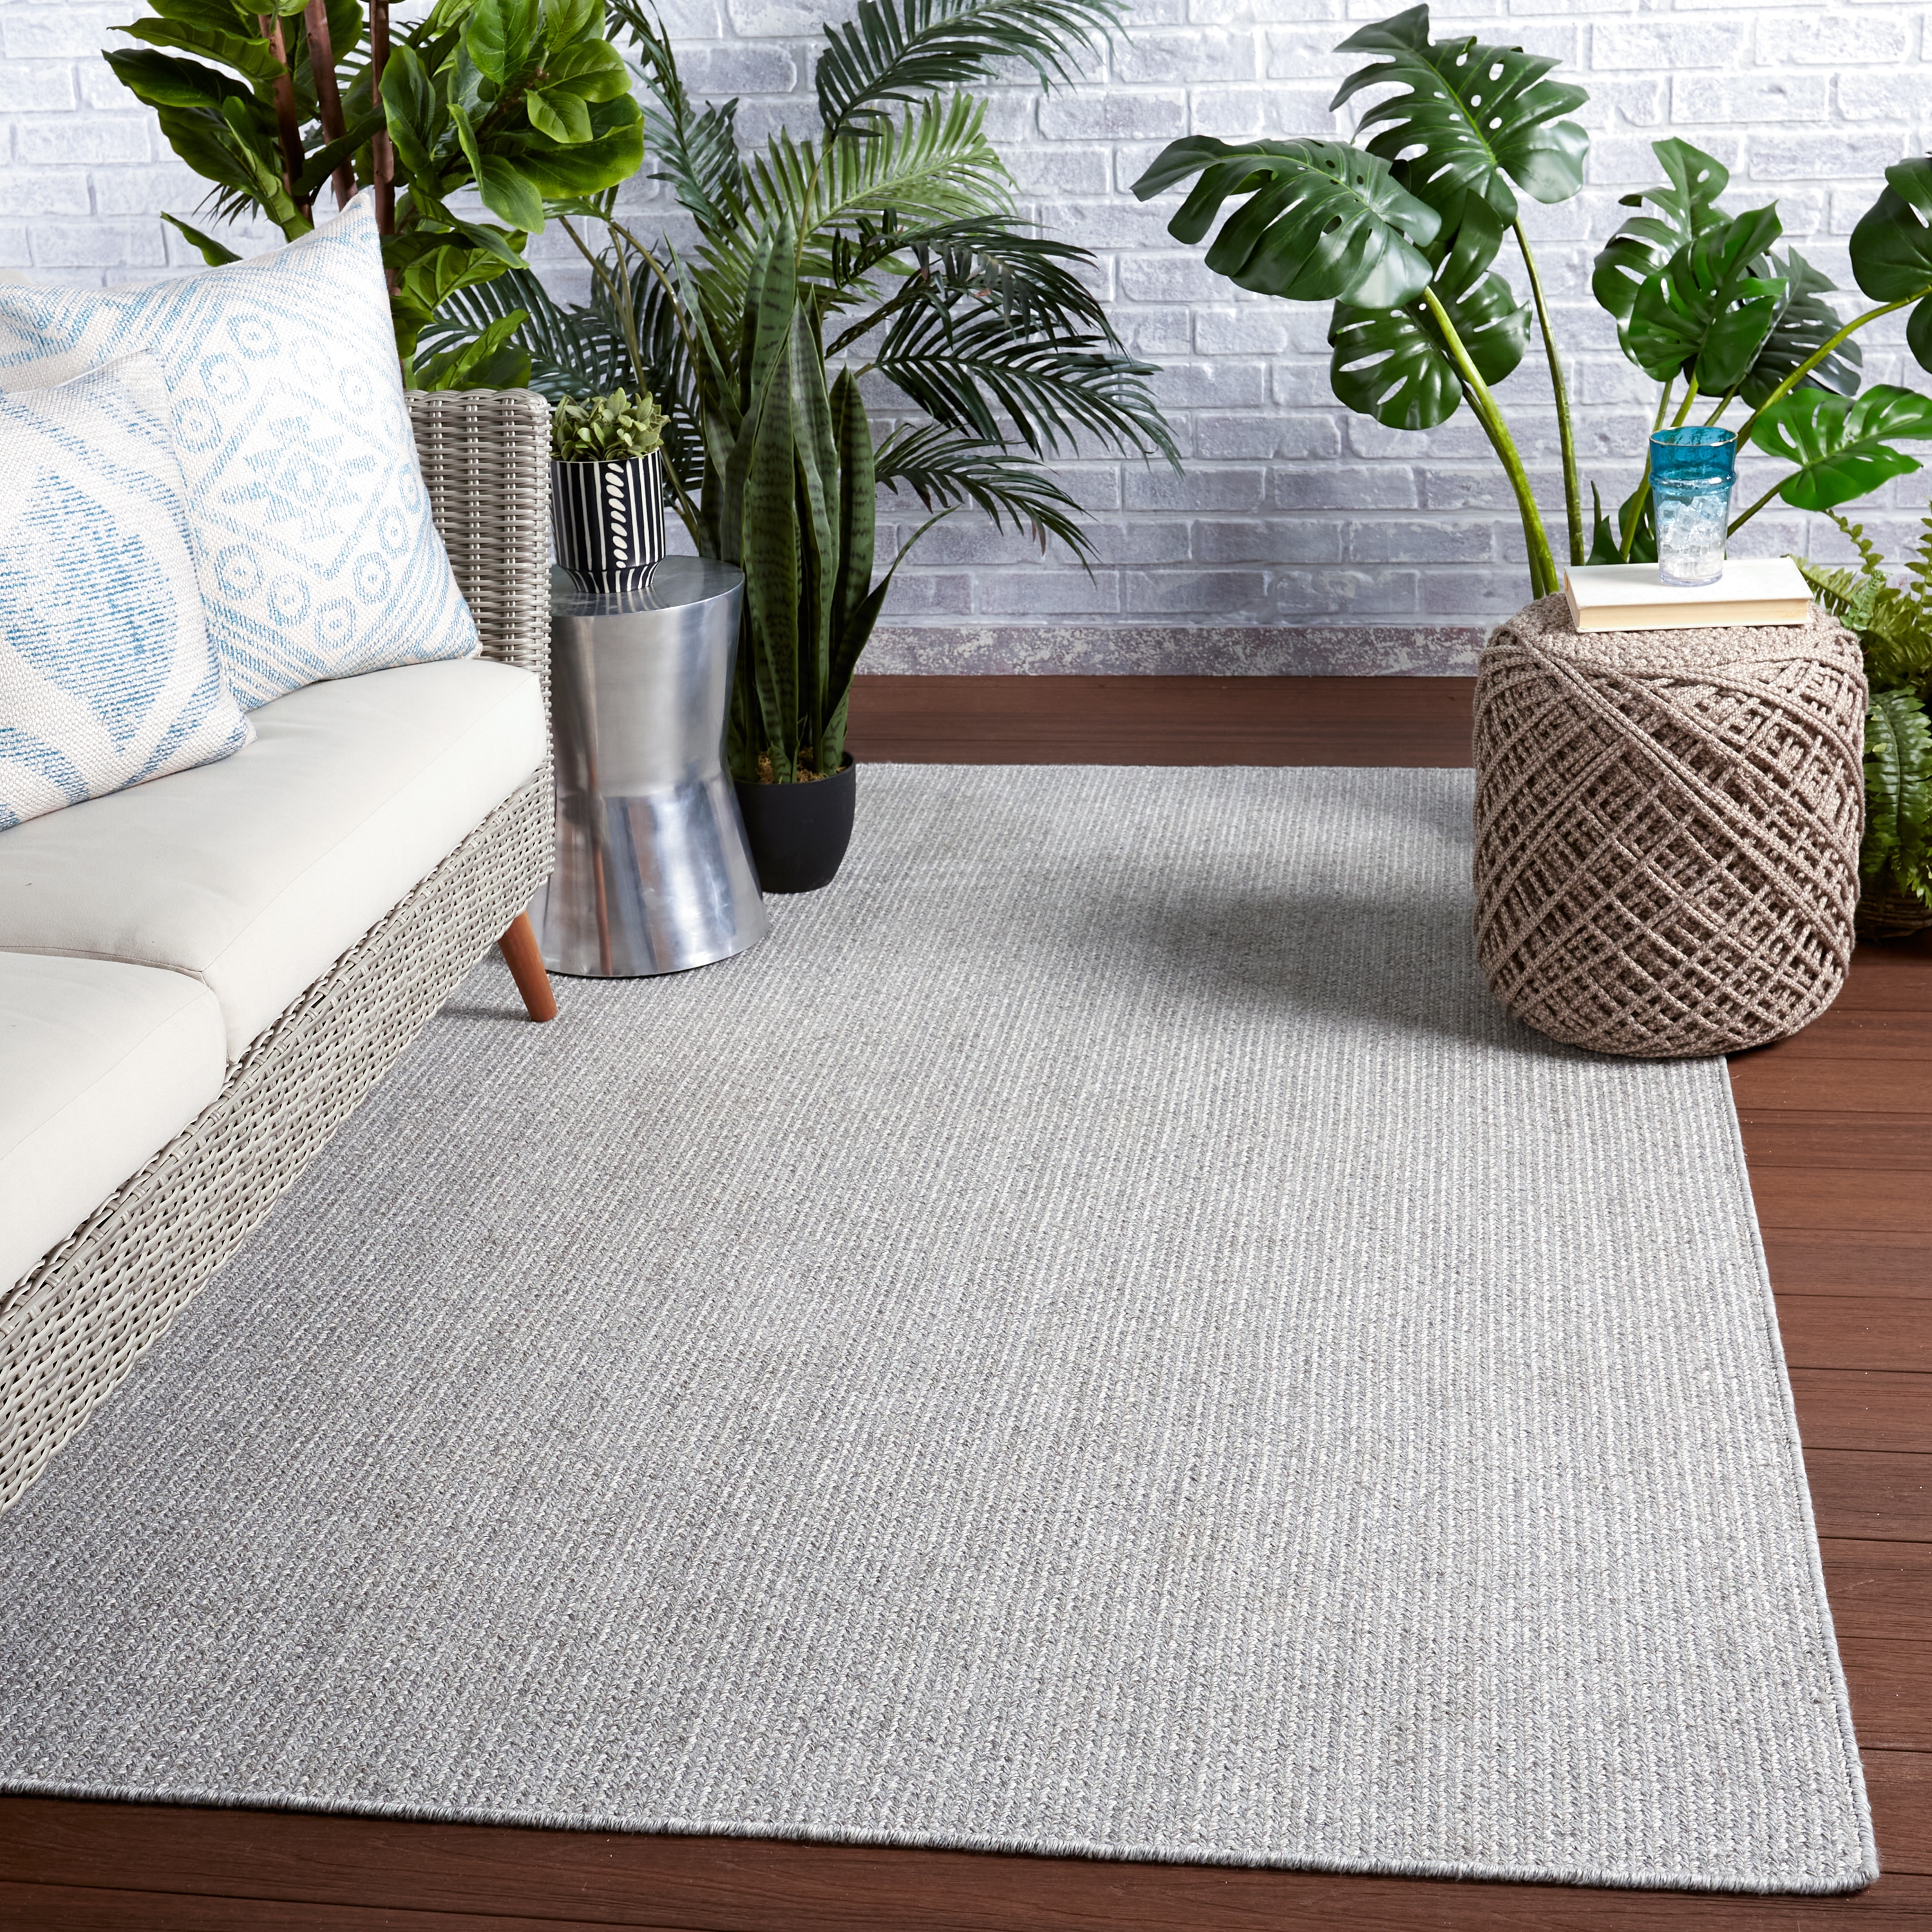 Maracay Indoor/ Outdoor Solid Light Gray/ White Area Rug (4'X6') - Image 4